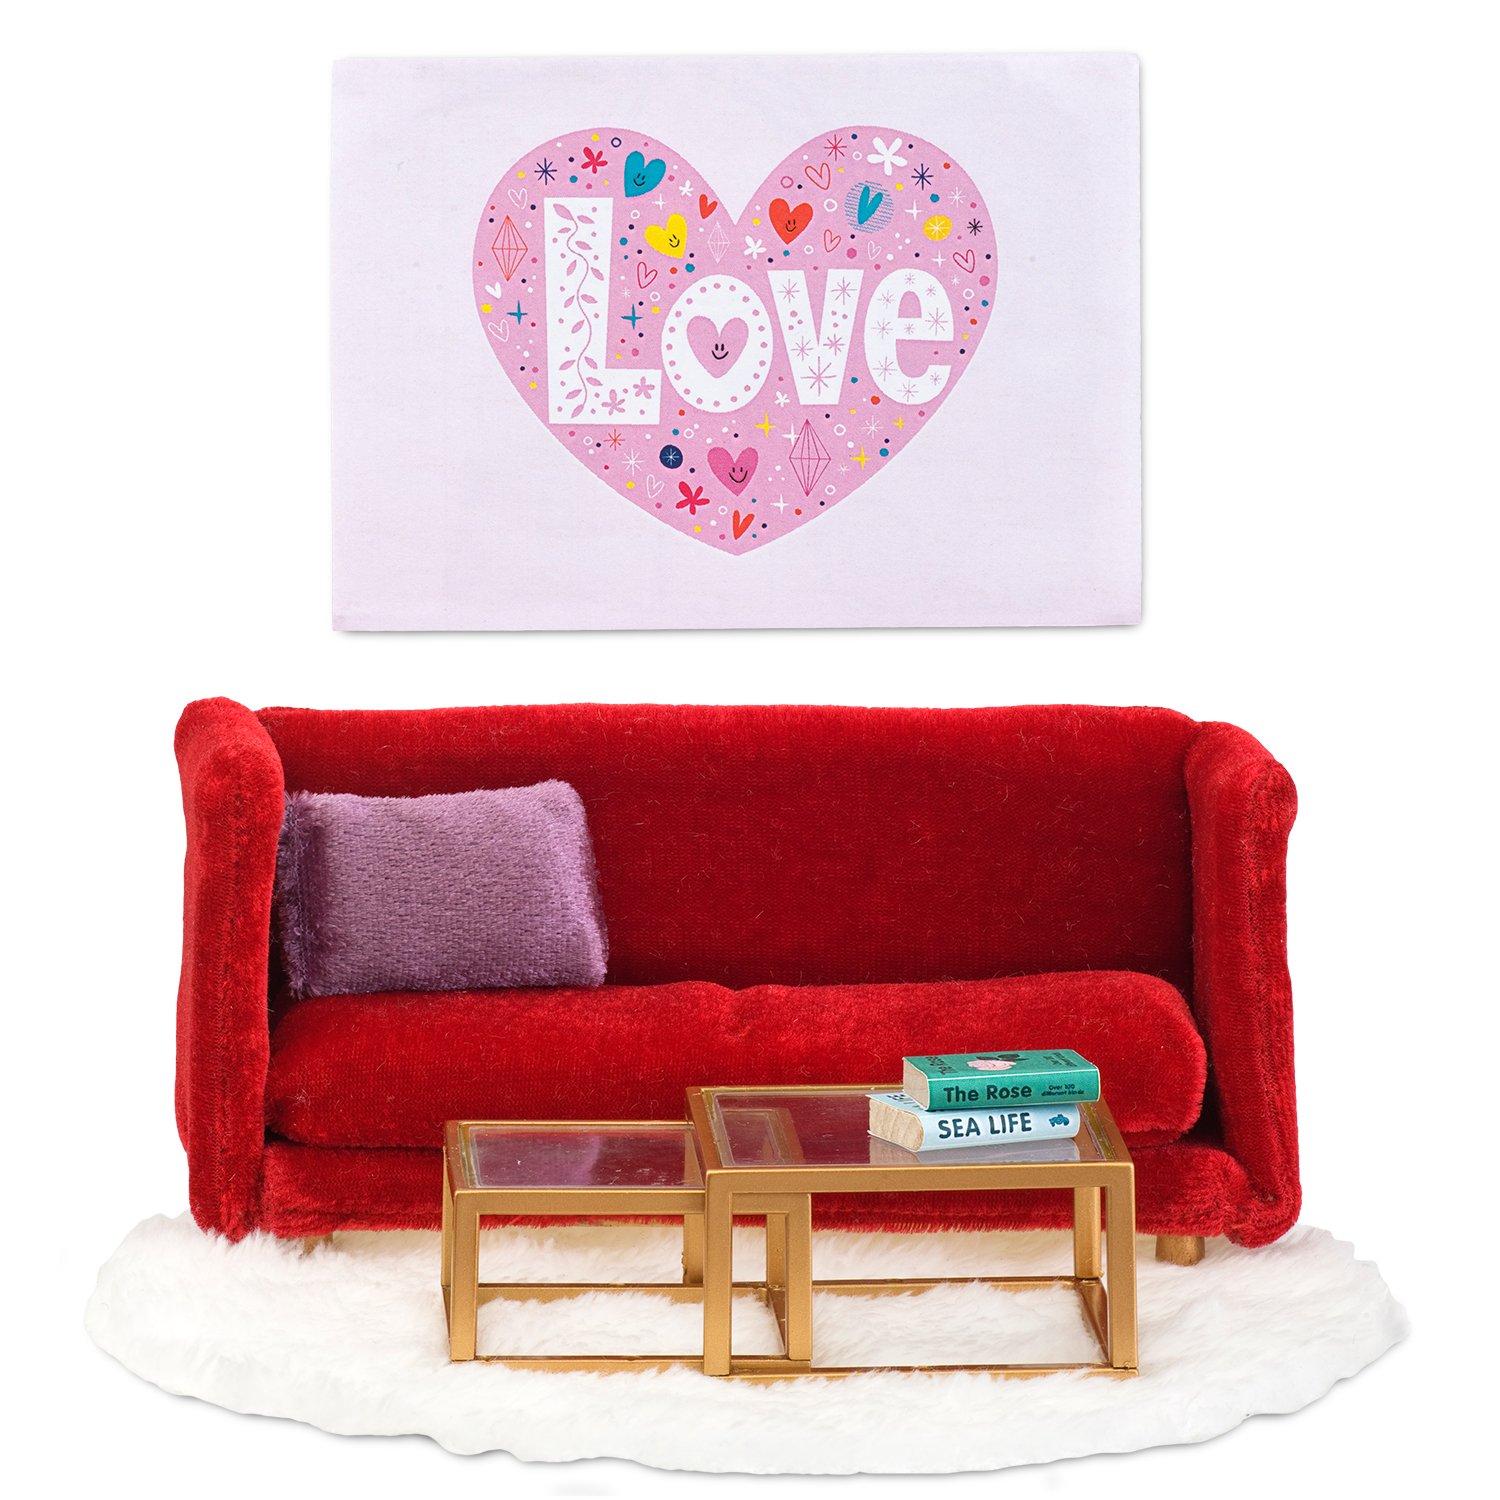 Lundby lundby dollhouse furniture living room set red